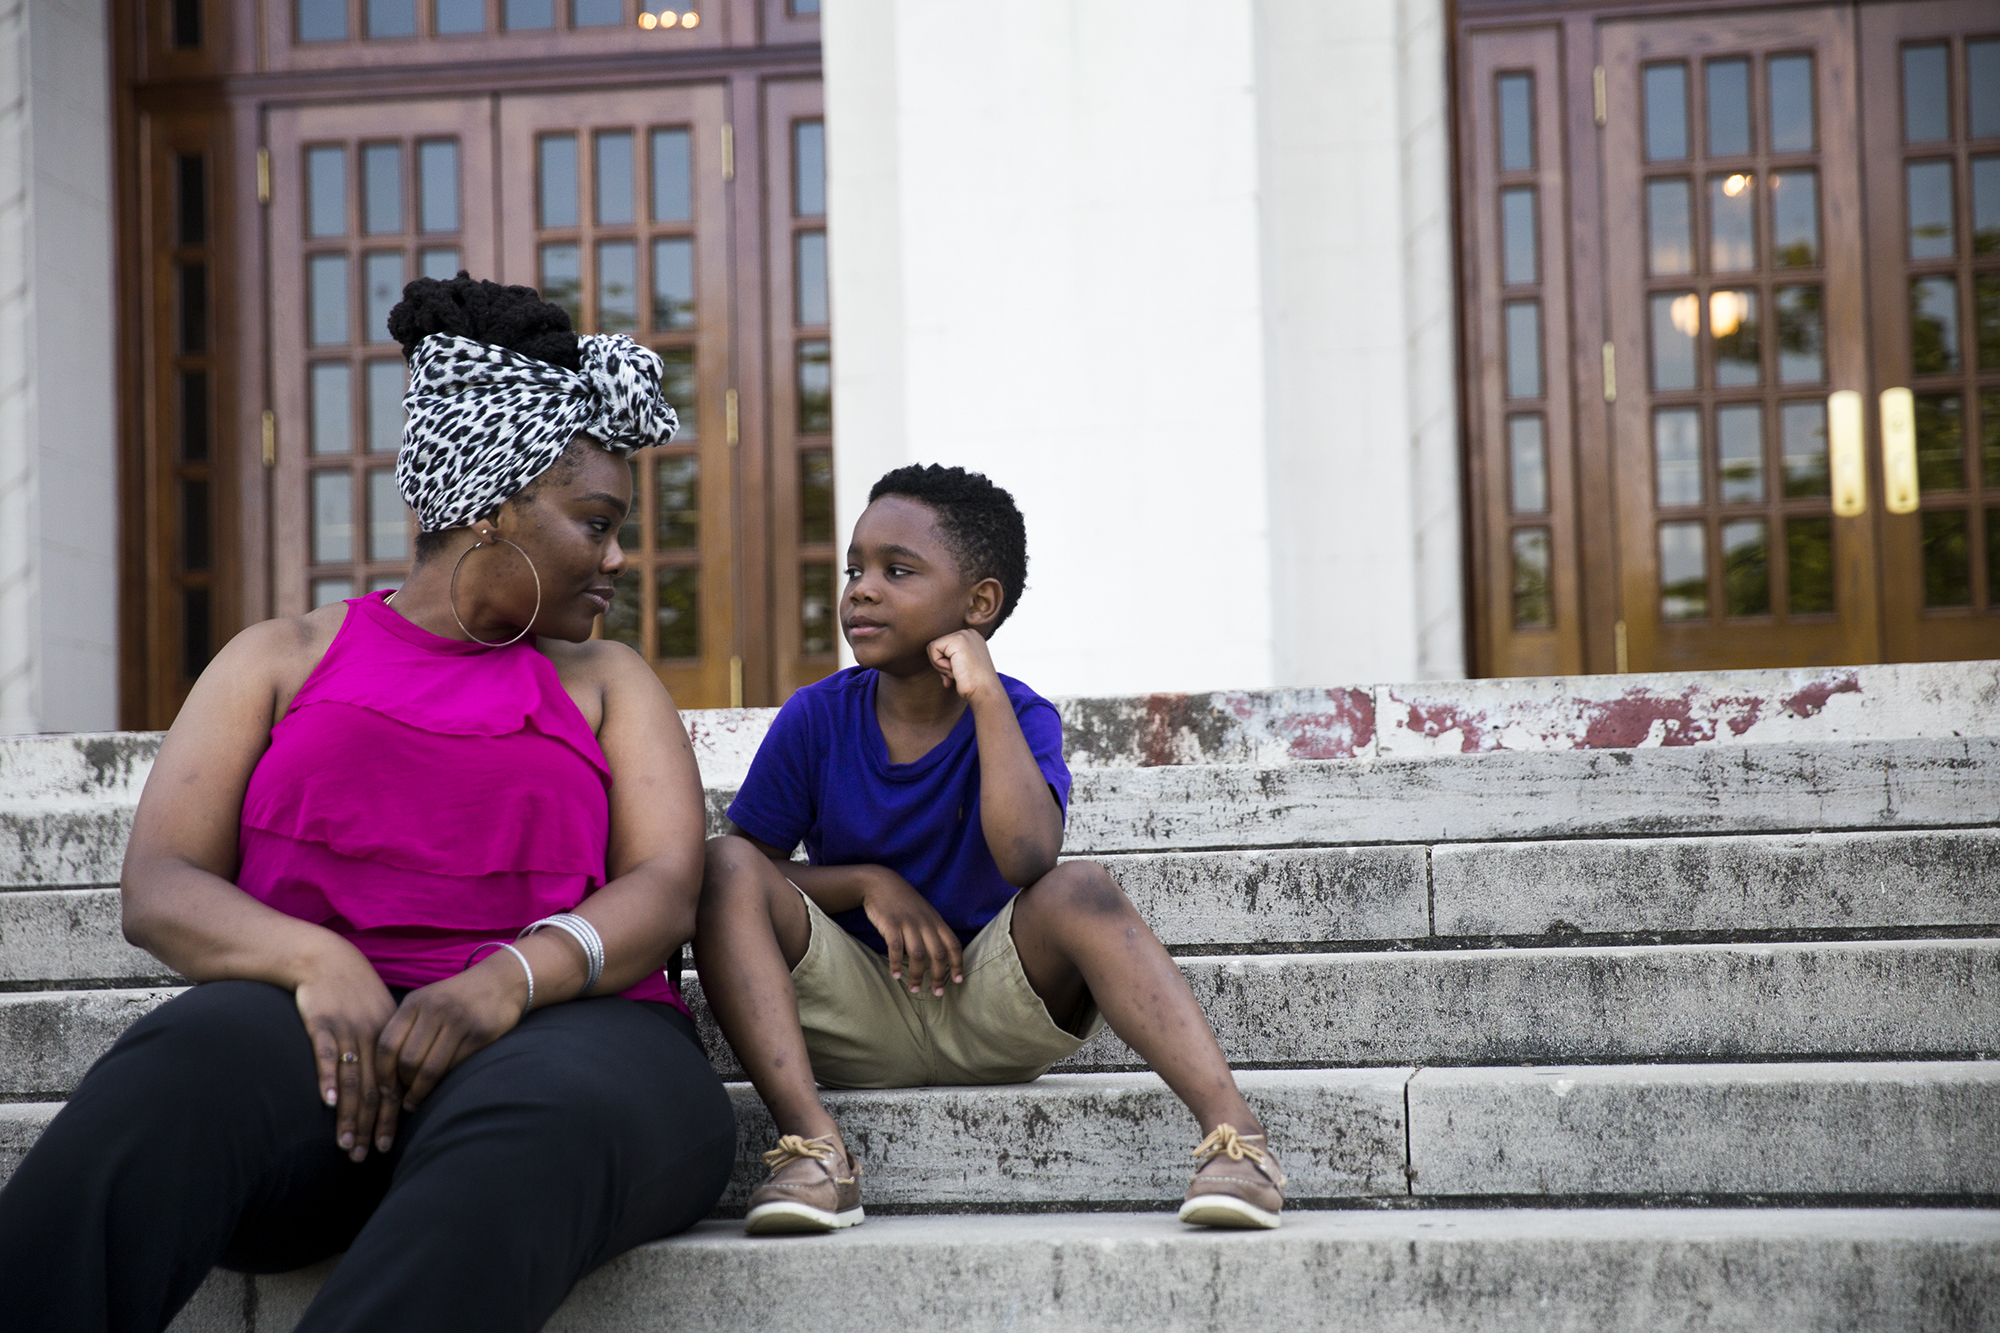 Isis Pettway and her son Caleb sit on the steps of historic Little Rock Central High School, one of the 48 Little Rock schools that Arkansas took control of in 2015. Pettway graduated from the school in 2000 and now sends her 7-year-old son to one of the city’s elementary schools. (Natalie Griffin/News21)